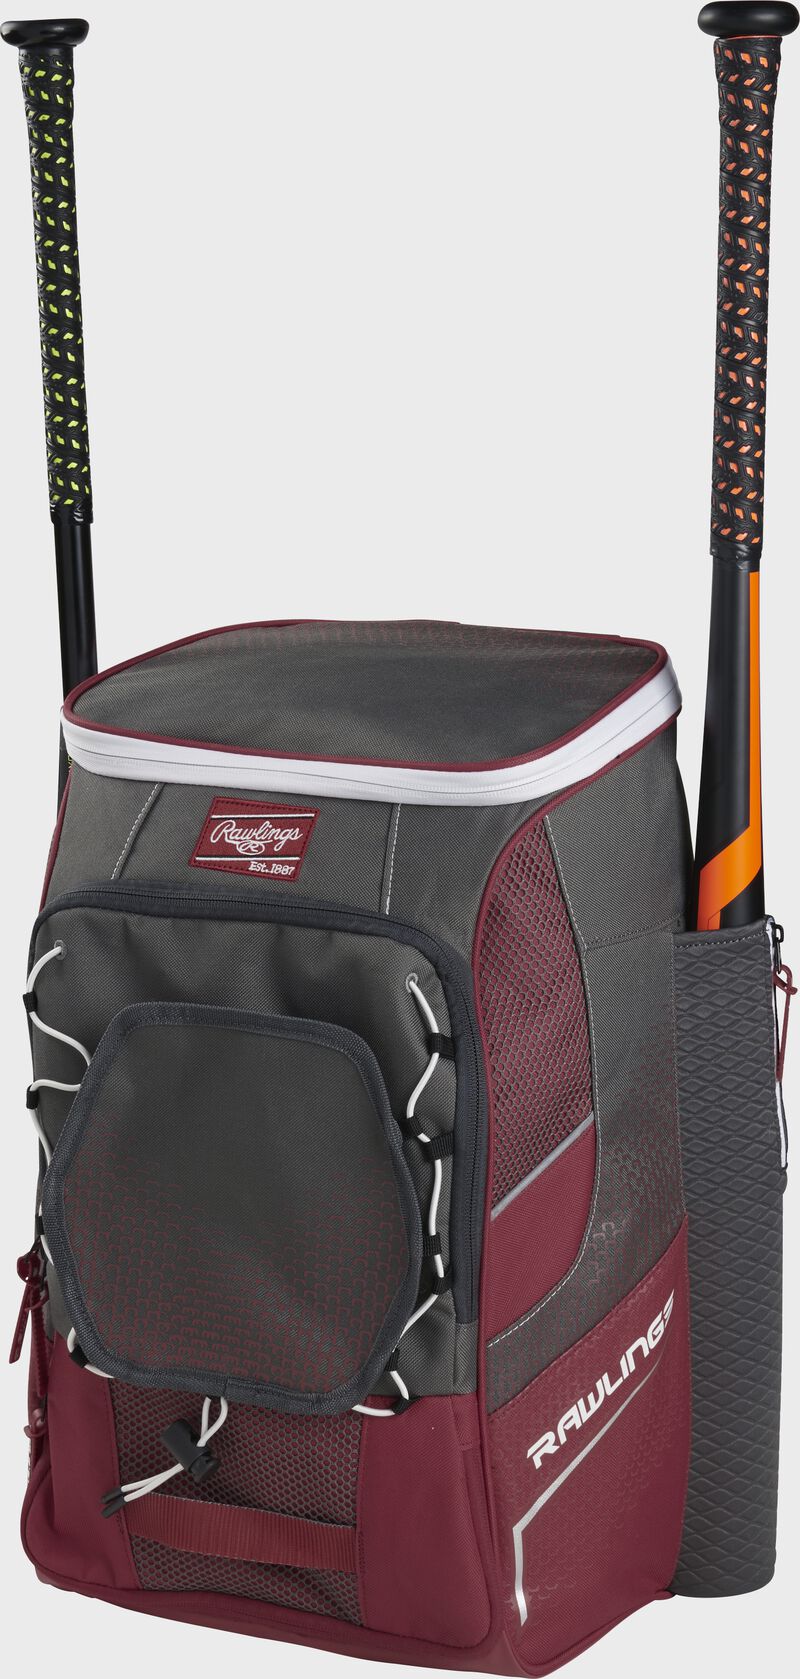 Front right angle view of a cardinal Impulse backpack with two bats in the side sleeves - SKU: IMPLSE-C image number null